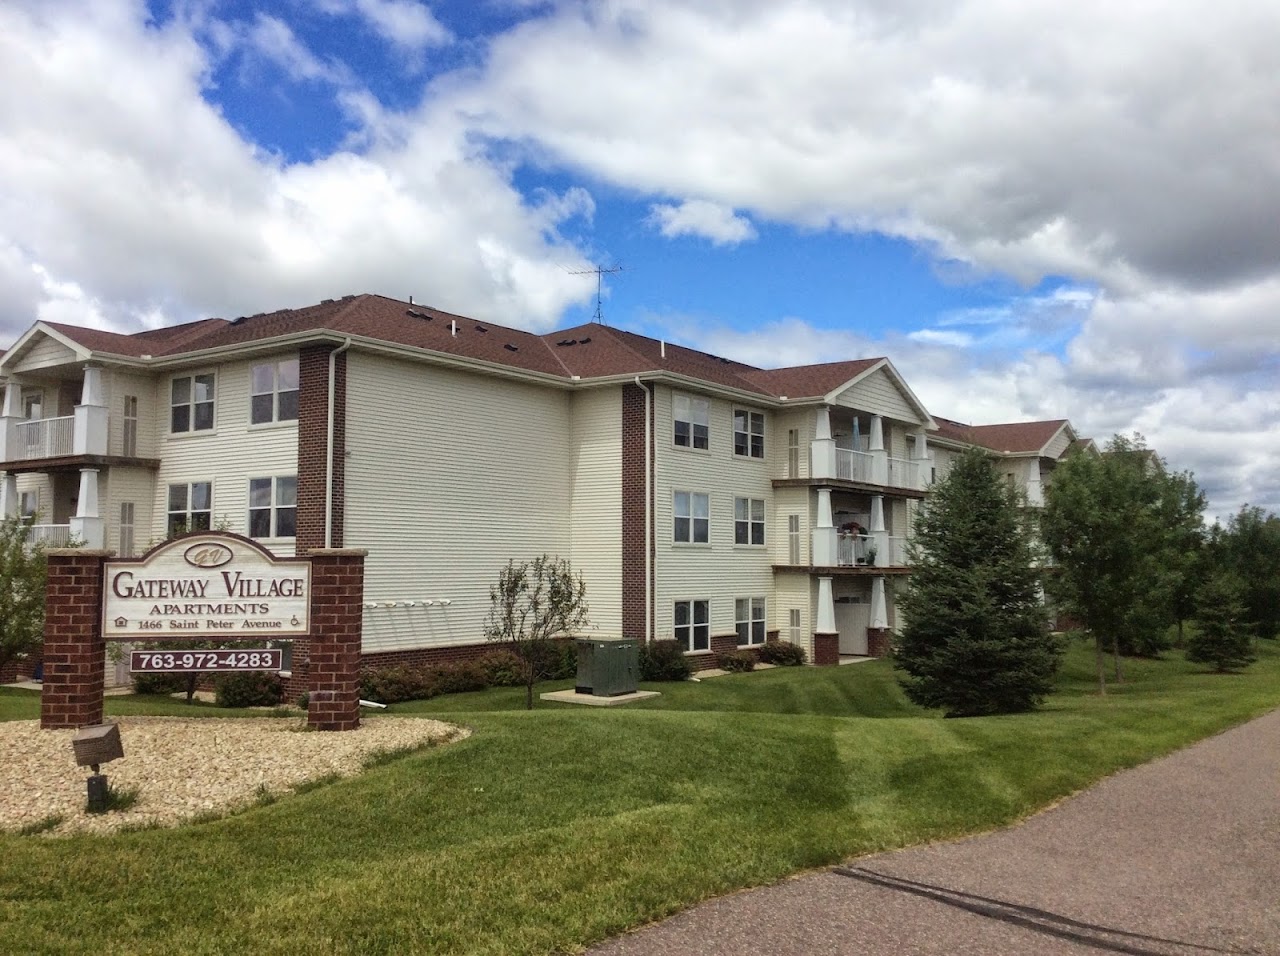 Photo of GATEWAY VILLAGE APARTMENTS. Affordable housing located at 1466 SAINT PETER AVE DELANO, MN 55328